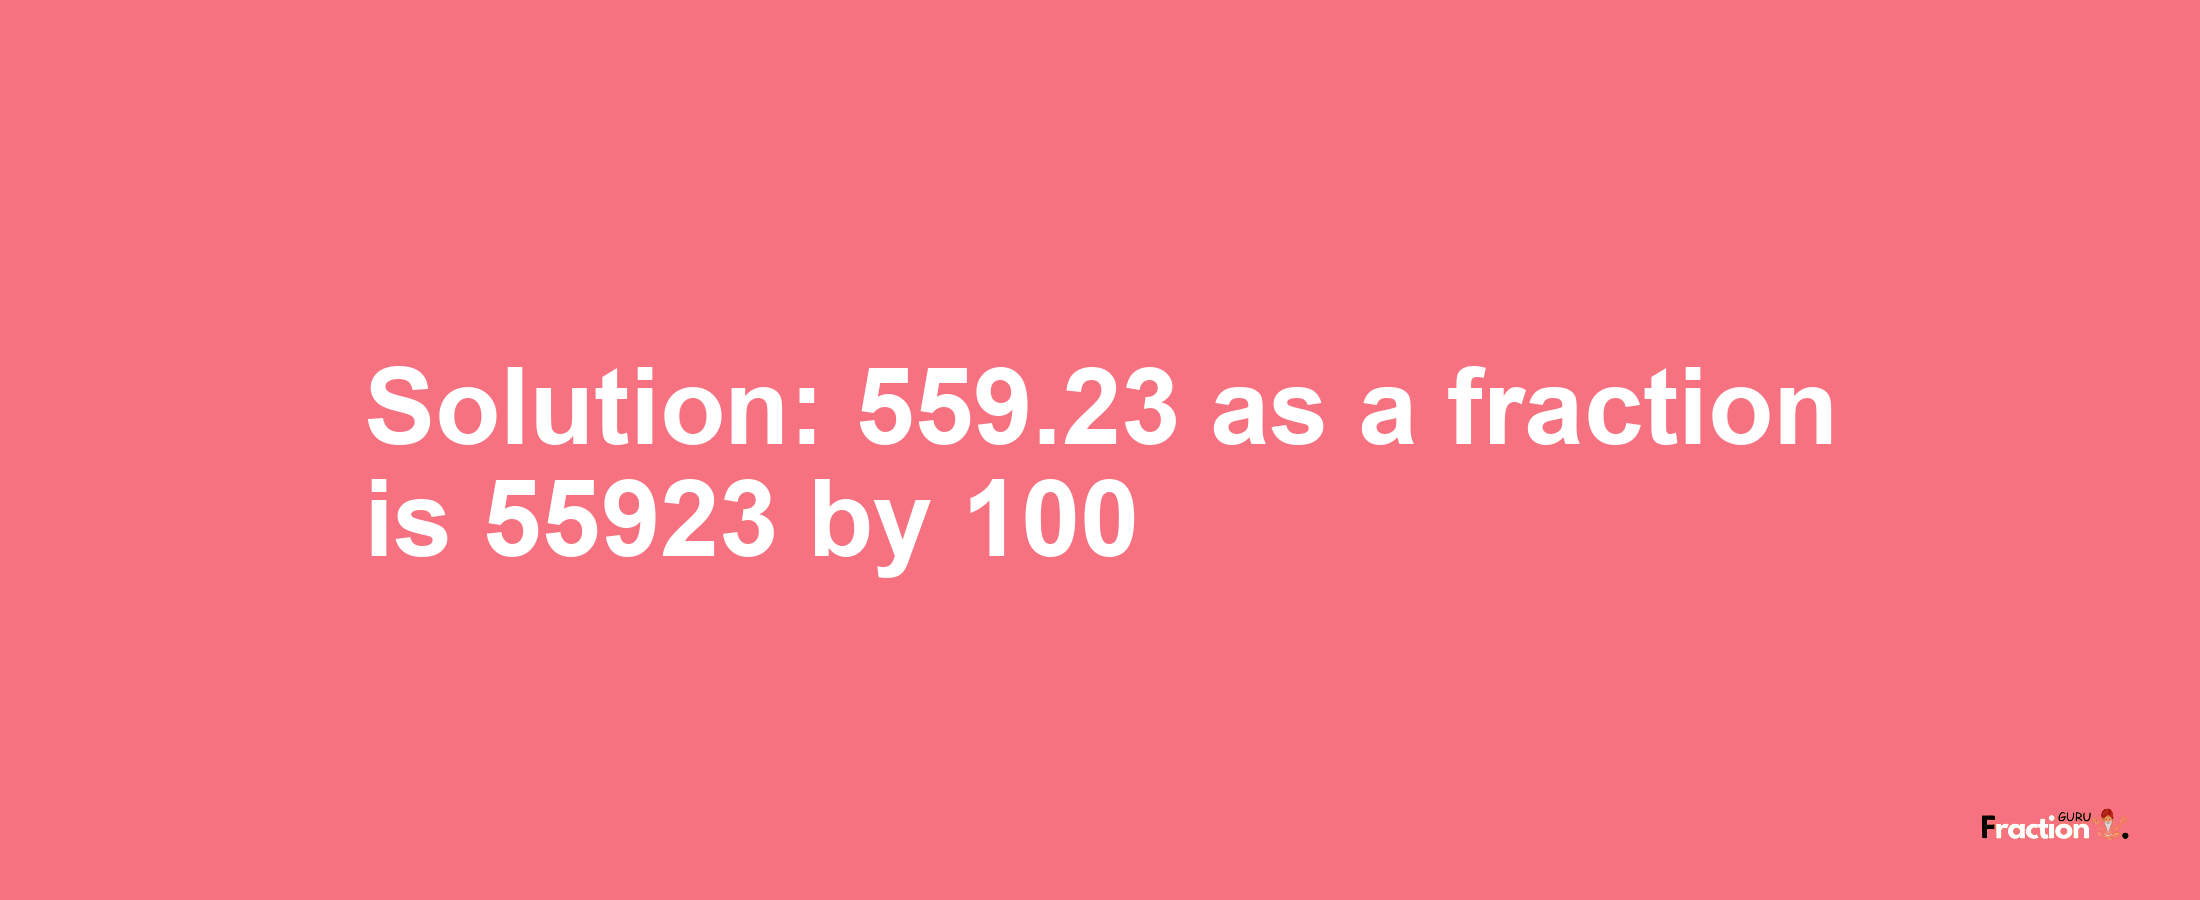 Solution:559.23 as a fraction is 55923/100